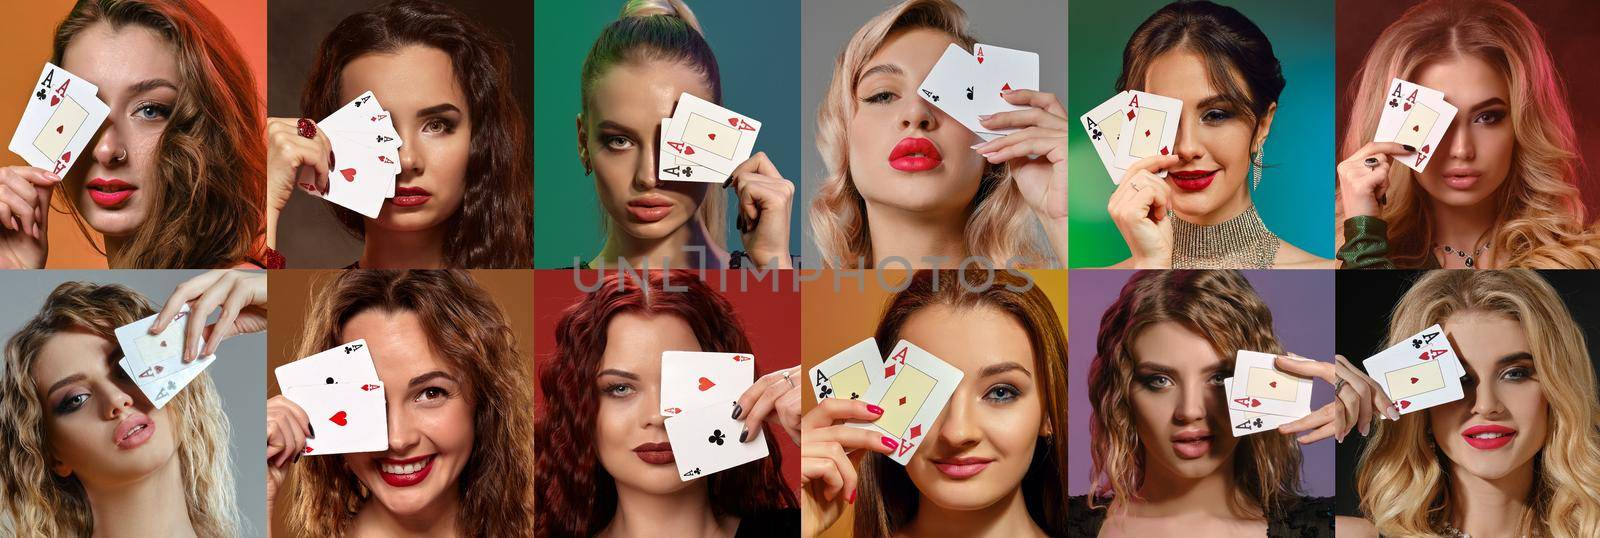 Collage of alluring models with bright make-up and stylish hairstyles, in jewelry. They have covered one eye with two playing cards, posing against colorful backgrounds. Poker, casino. Close-up